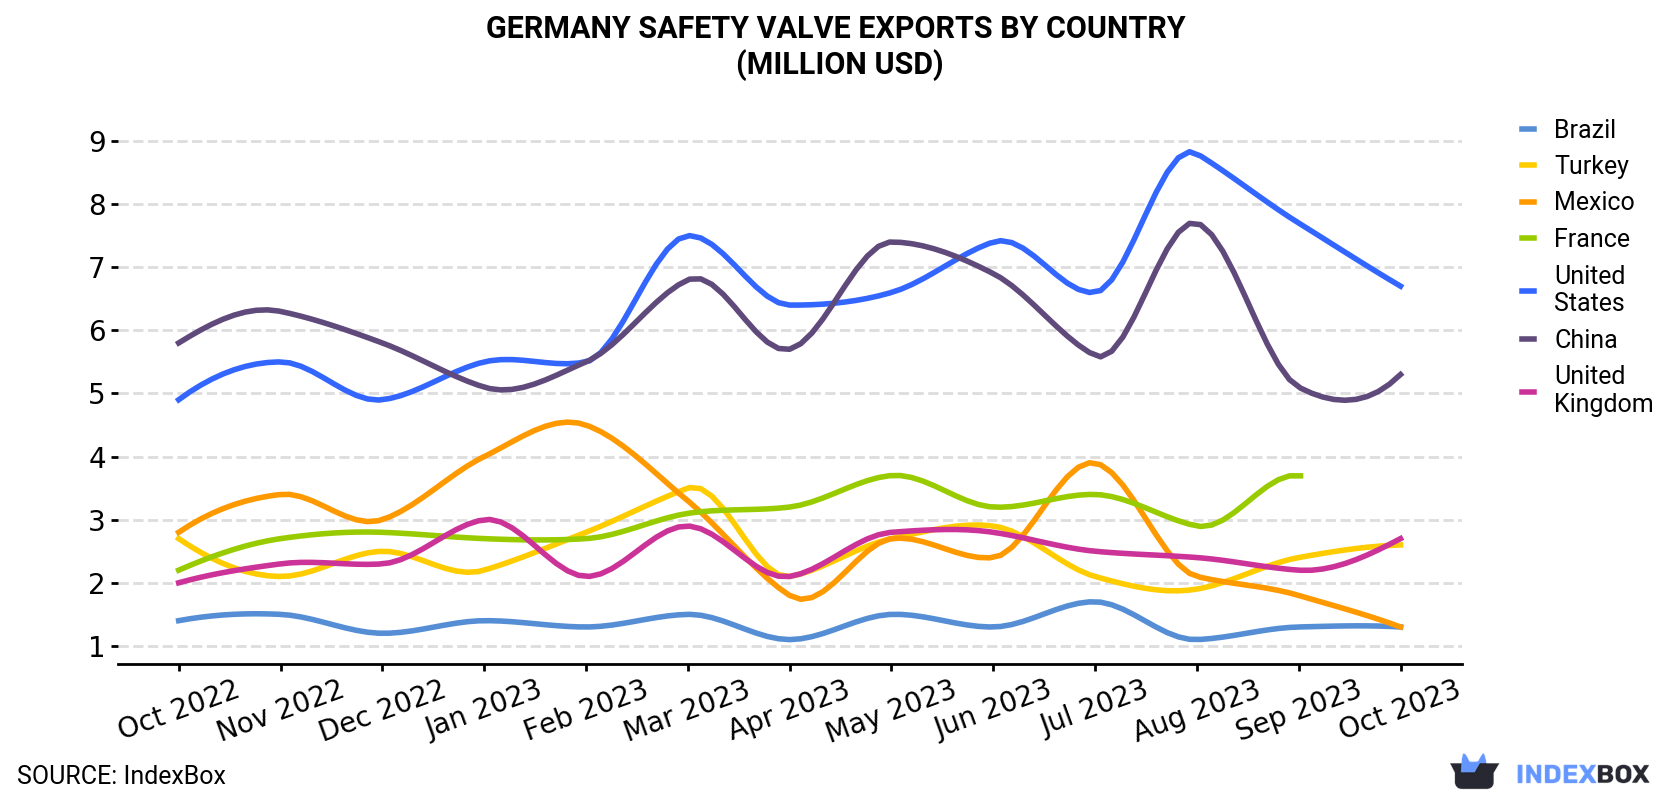 Germany Safety Valve Exports By Country (Million USD)